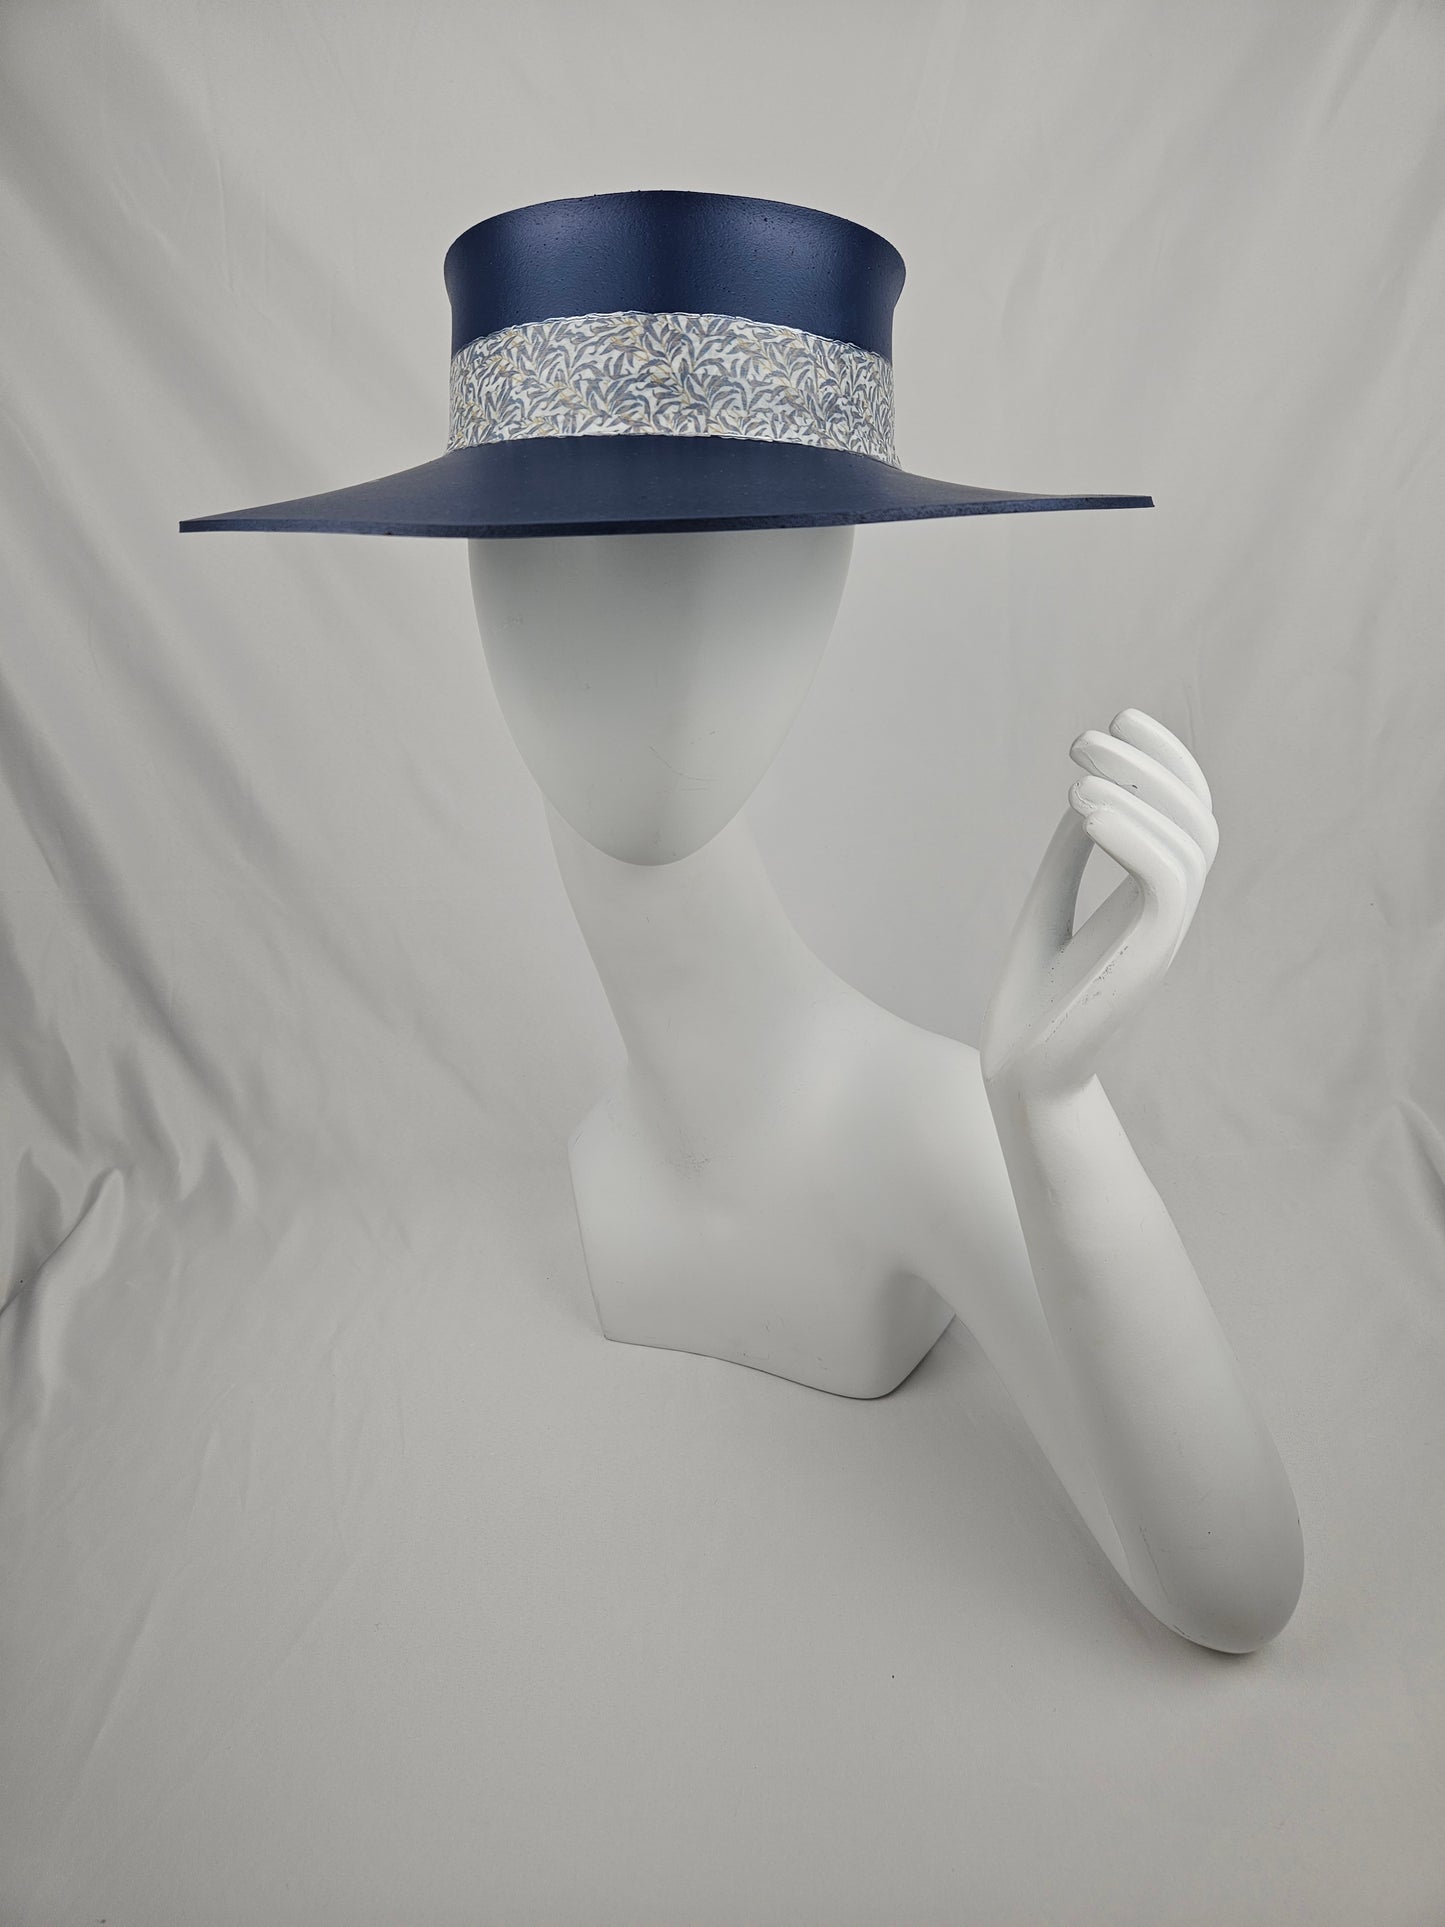 Classic Navy Audrey Foam Sun Visor Hat with Silver Leaf Patterned Band and Handpainted Floral Motif: Big Brim, Golf, Swim, UV Resistant, No Headache